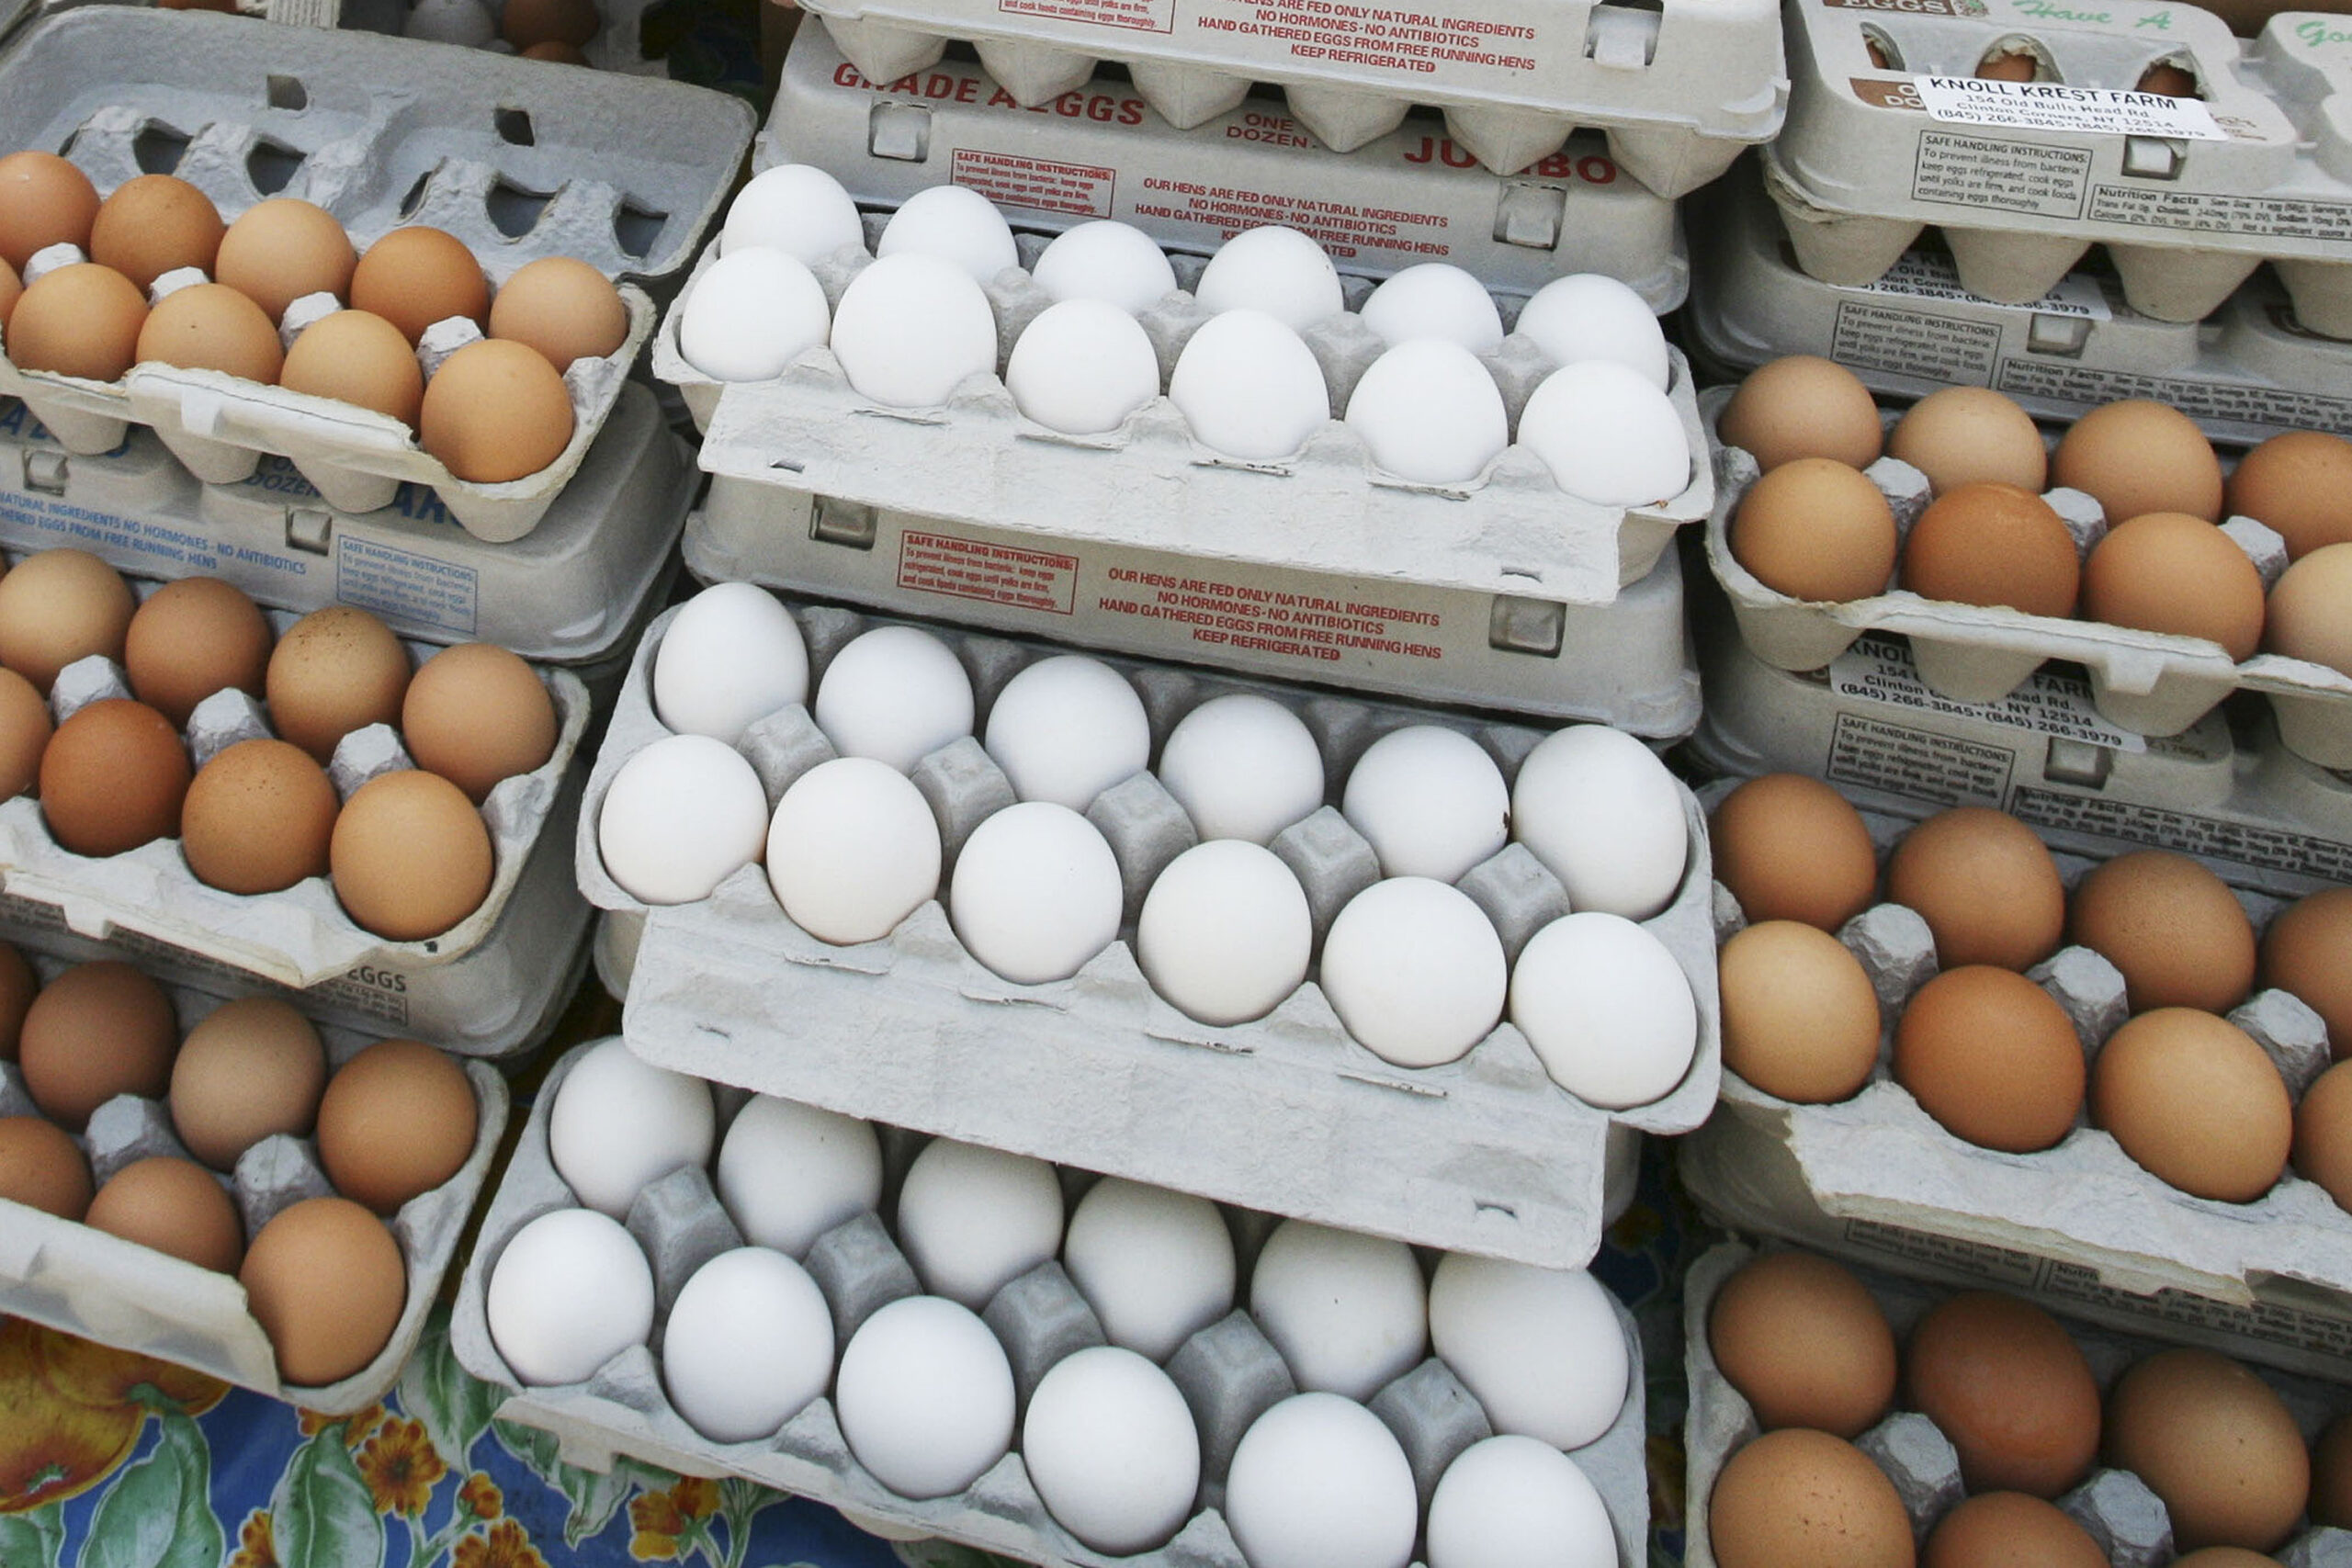 Wisconsin egg producer says market returning to normal after months of high egg prices, industry profits